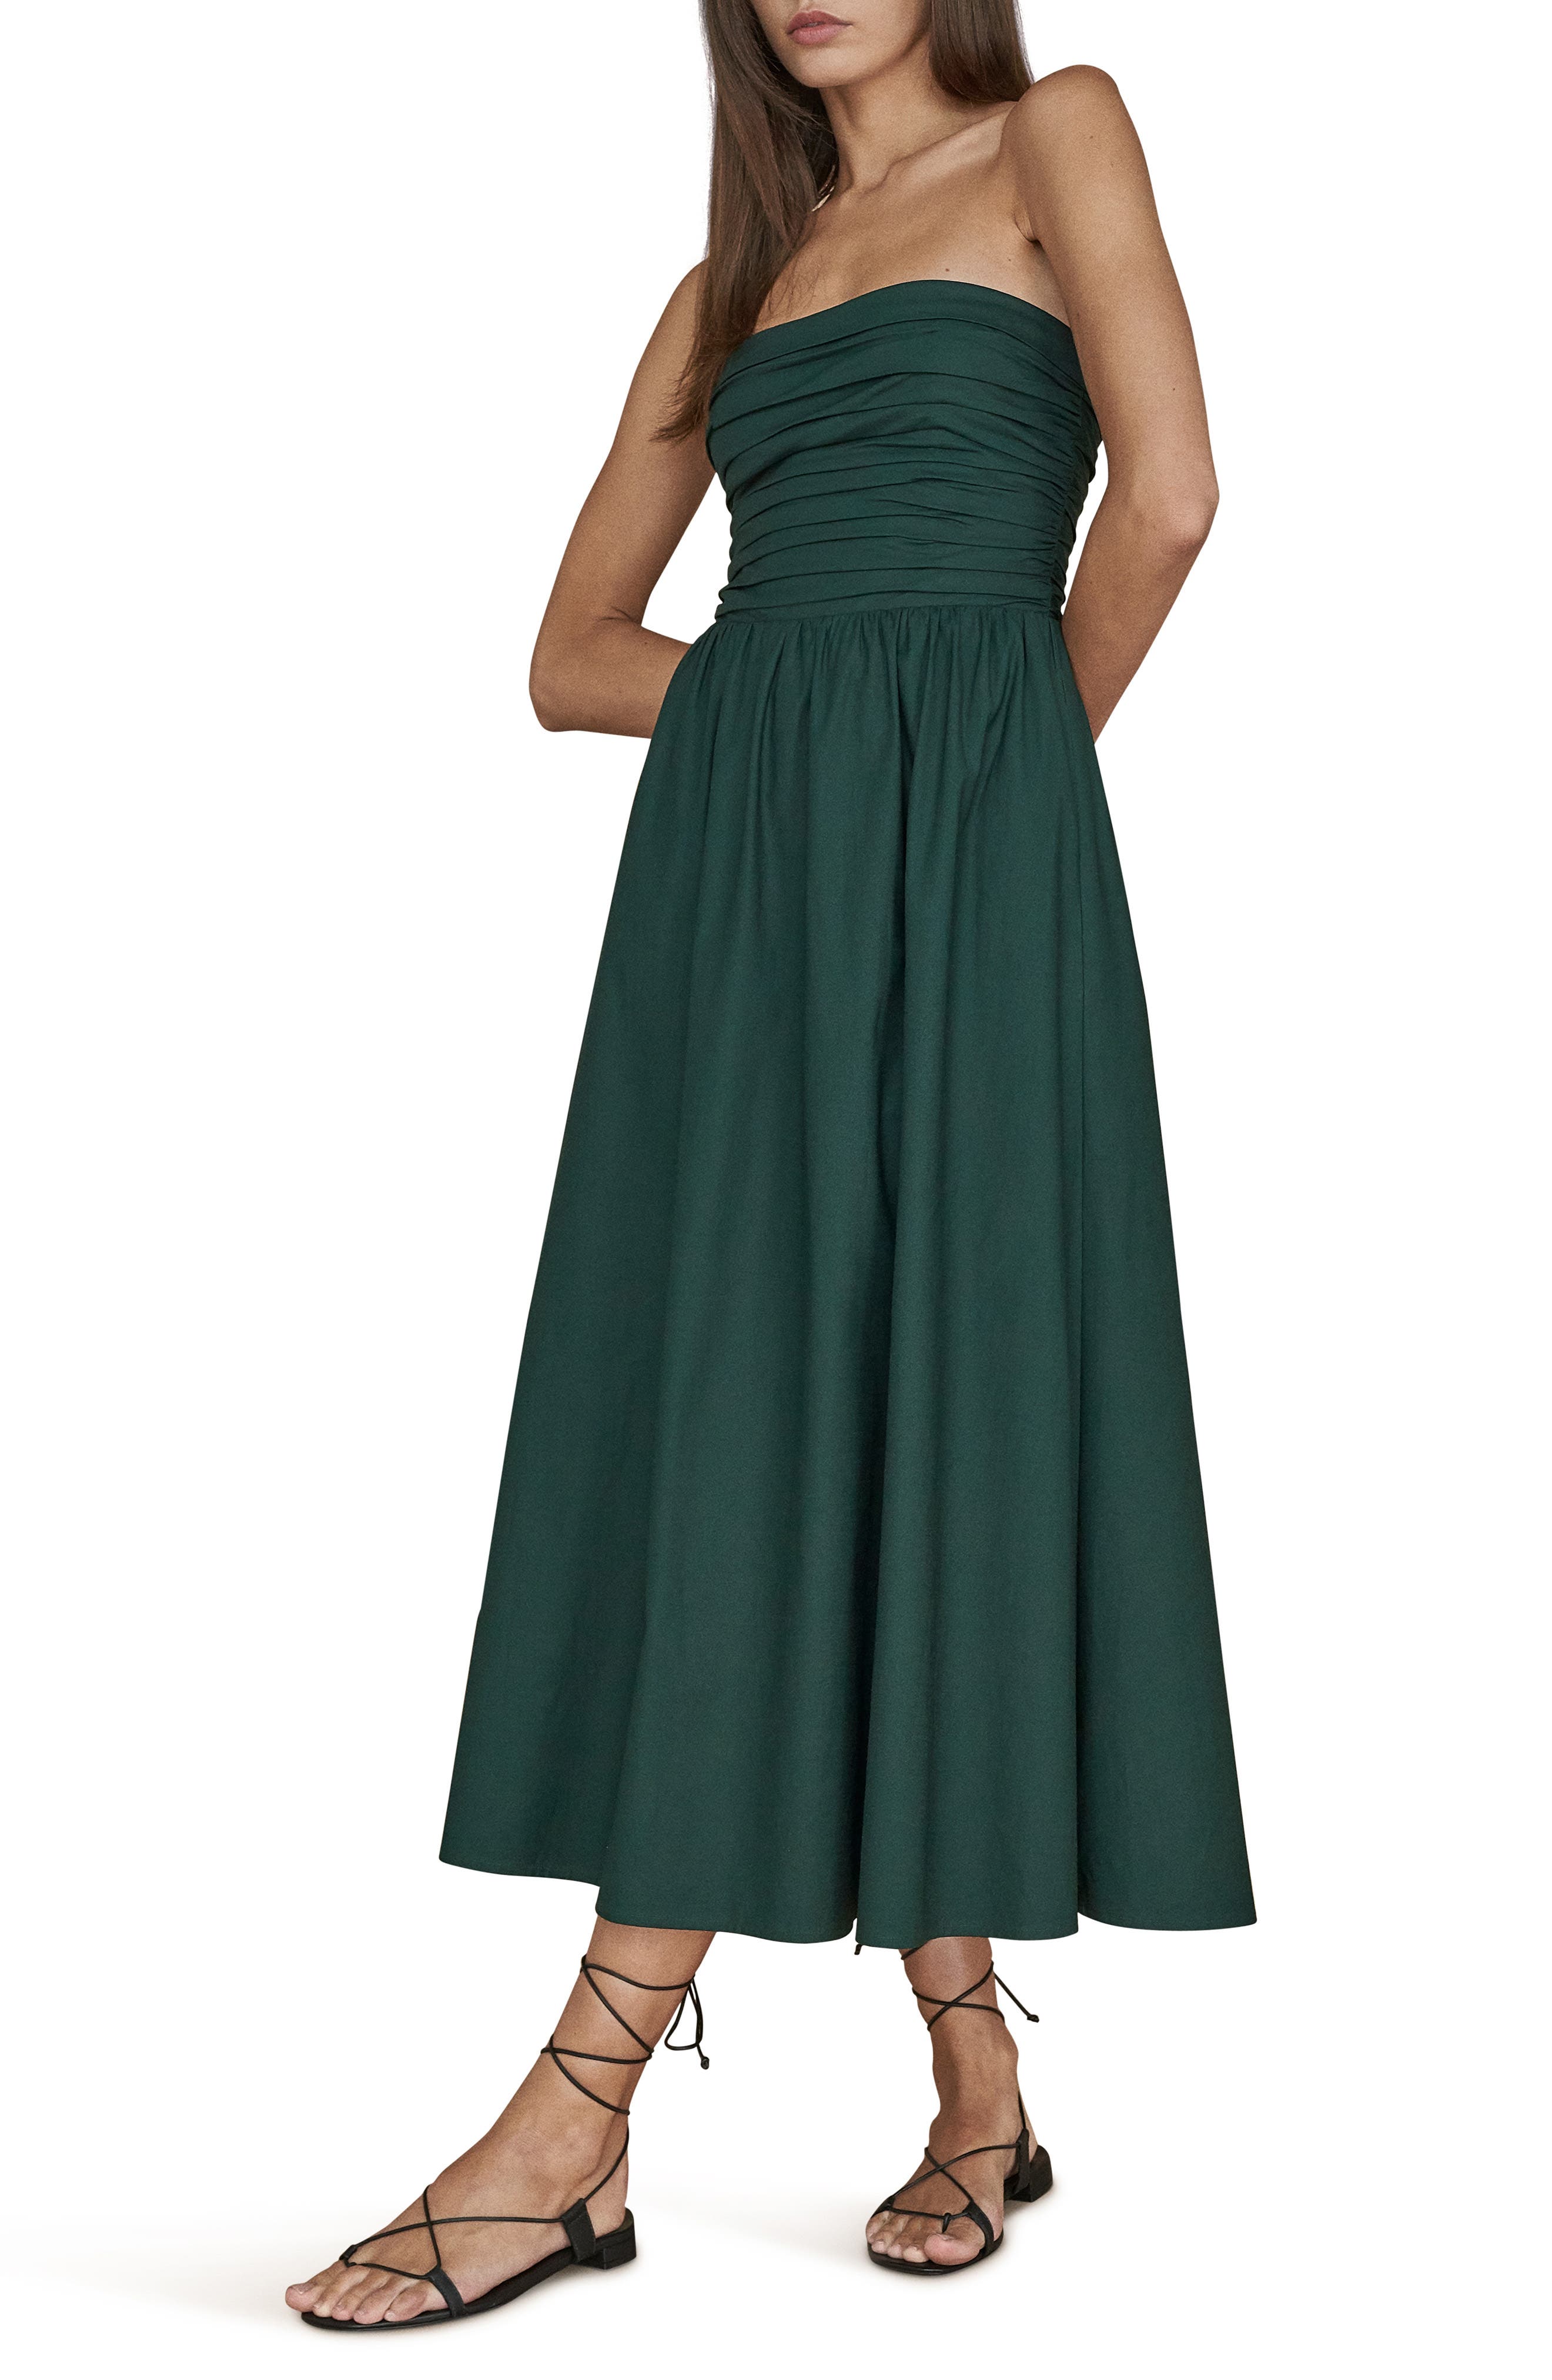 Reformation Lissa Strapless Maxi Dress in Forest at Nordstrom, Size 2